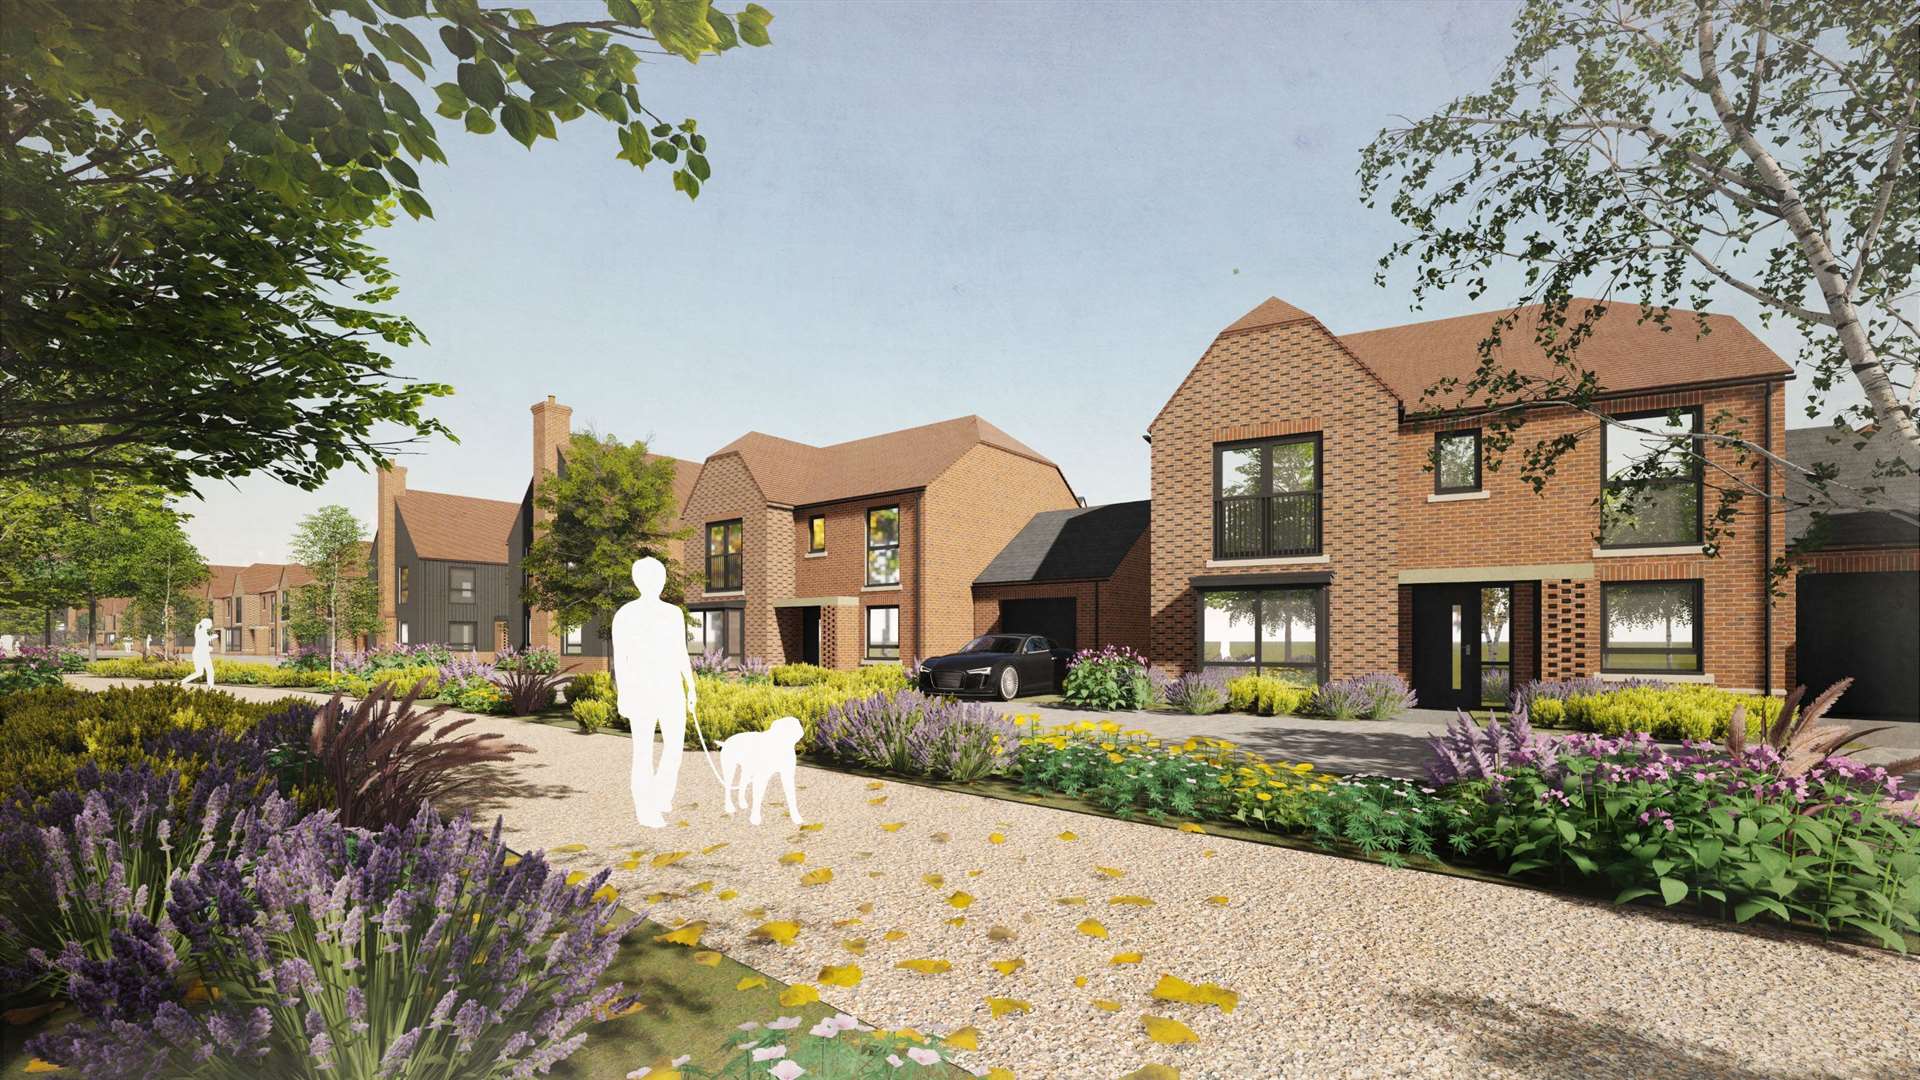 The Whitecliffe development by Bellway on the Ebbsfleet Garden City has been given planning permission